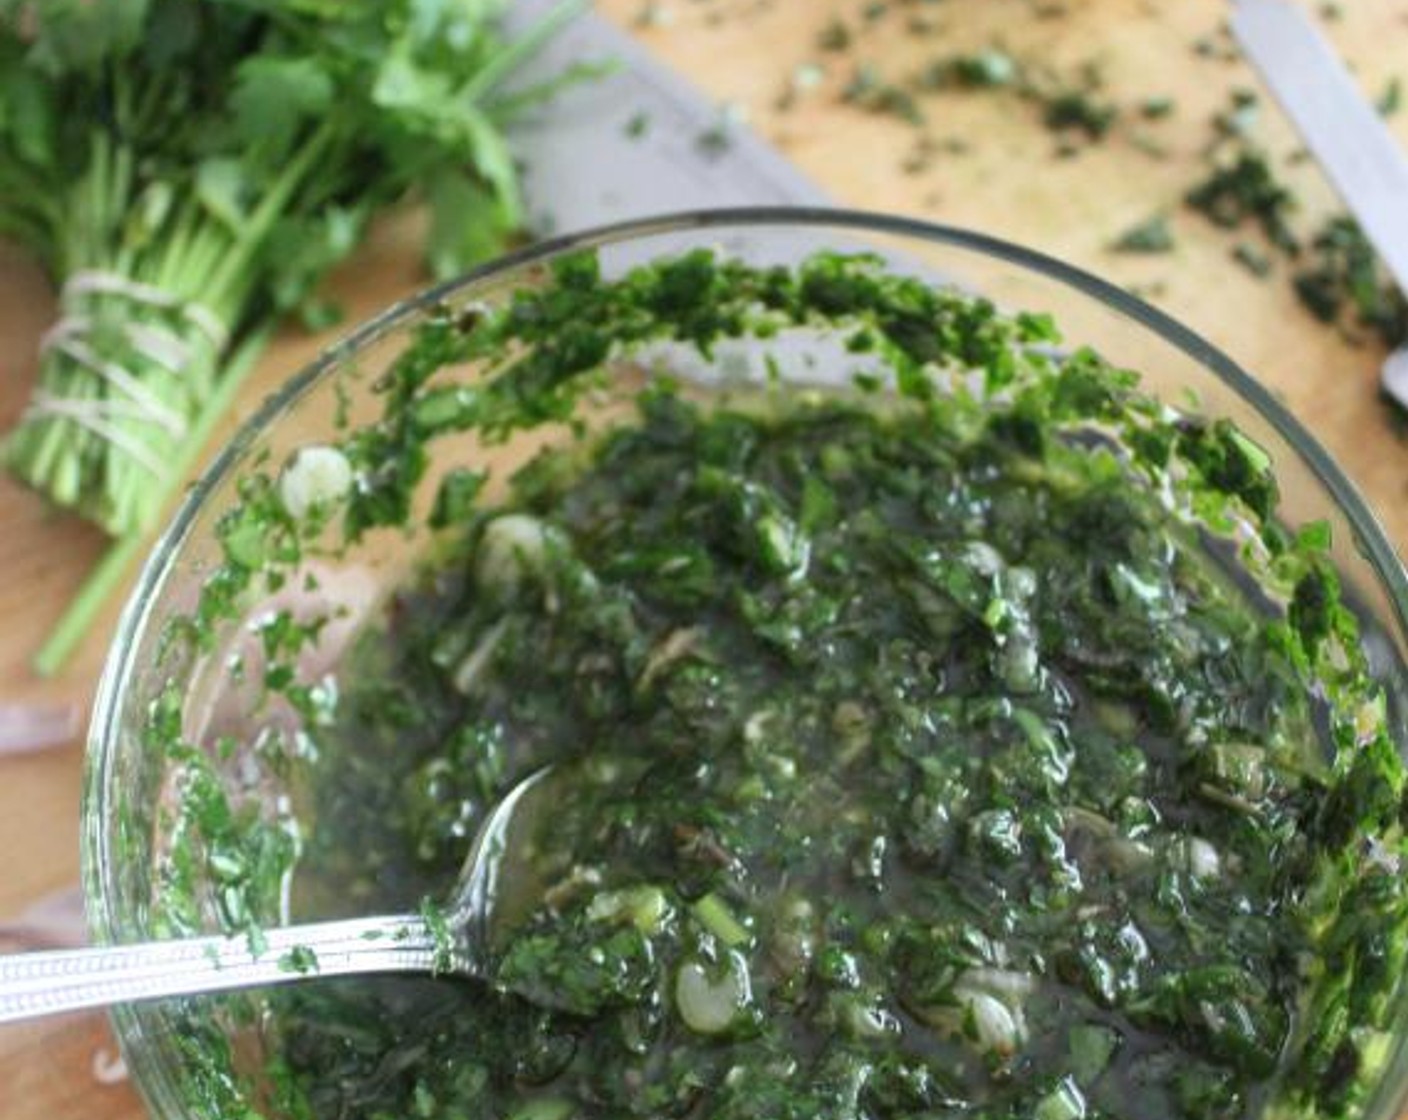 step 3 Add the Fresh Parsley (3/4 cup), Fresh Mint (1/2 cup), Garlic (1 clove), Capers (1 1/2 Tbsp), and Kosher Salt (1/2 tsp) and stir to combine. Add Olive Oil (1/2 cup) (1/2 cup plus 1 Tbsp). Mix well and set aside.